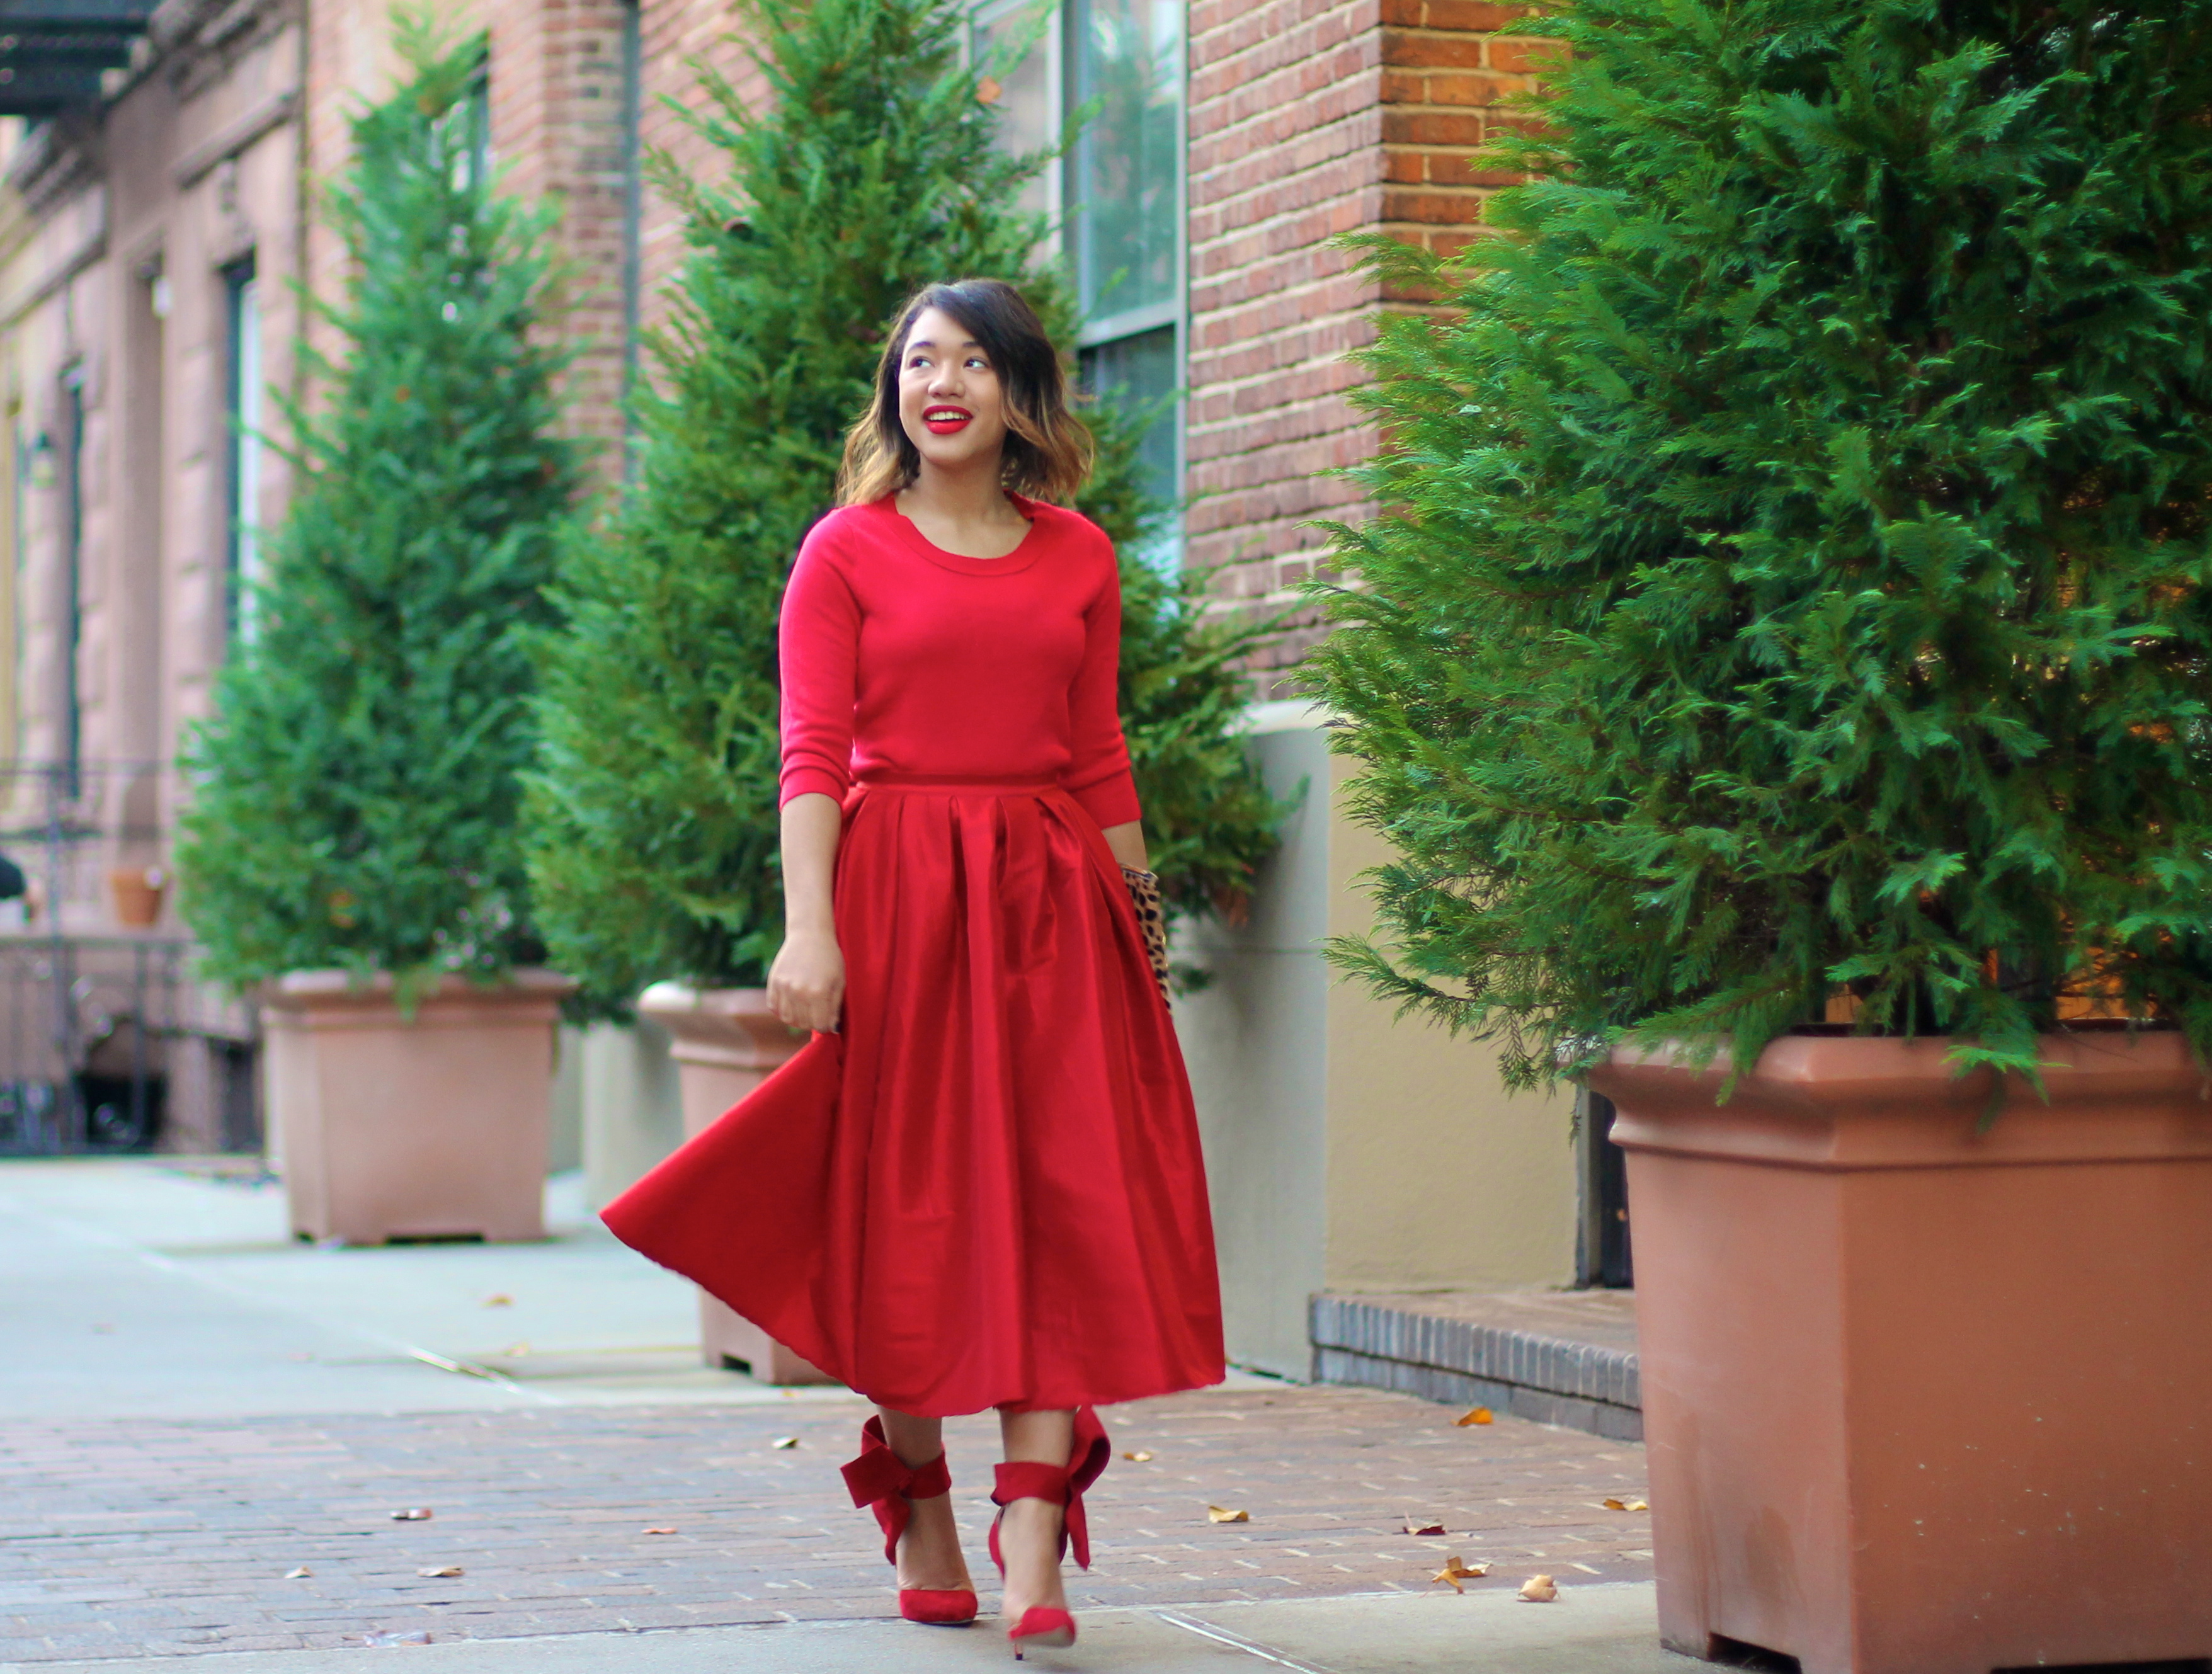 Blogger Style: How To Rock A Red Skirt (Le Fashion)